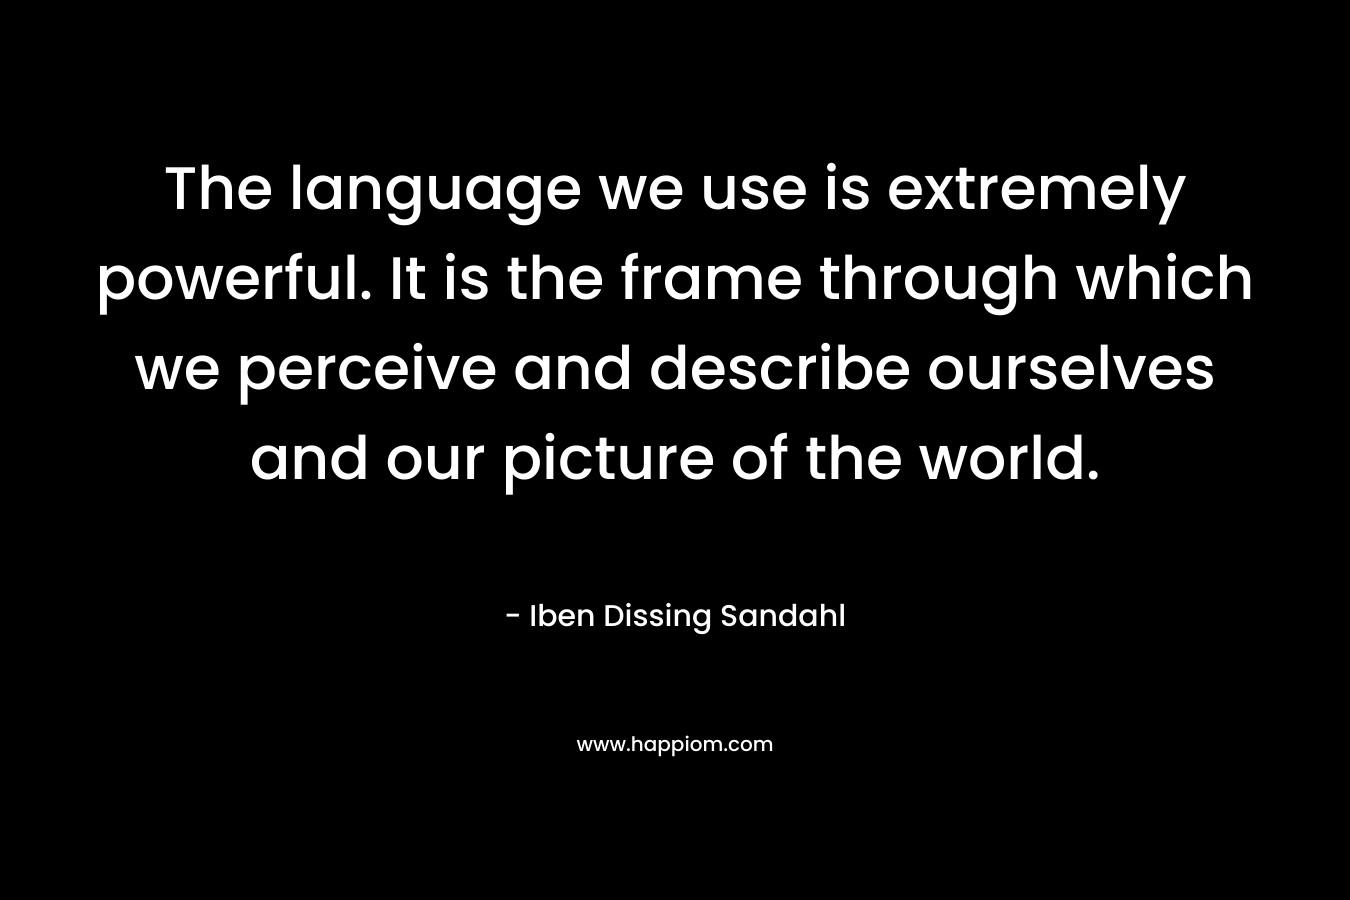 The language we use is extremely powerful. It is the frame through which we perceive and describe ourselves and our picture of the world. – Iben Dissing Sandahl